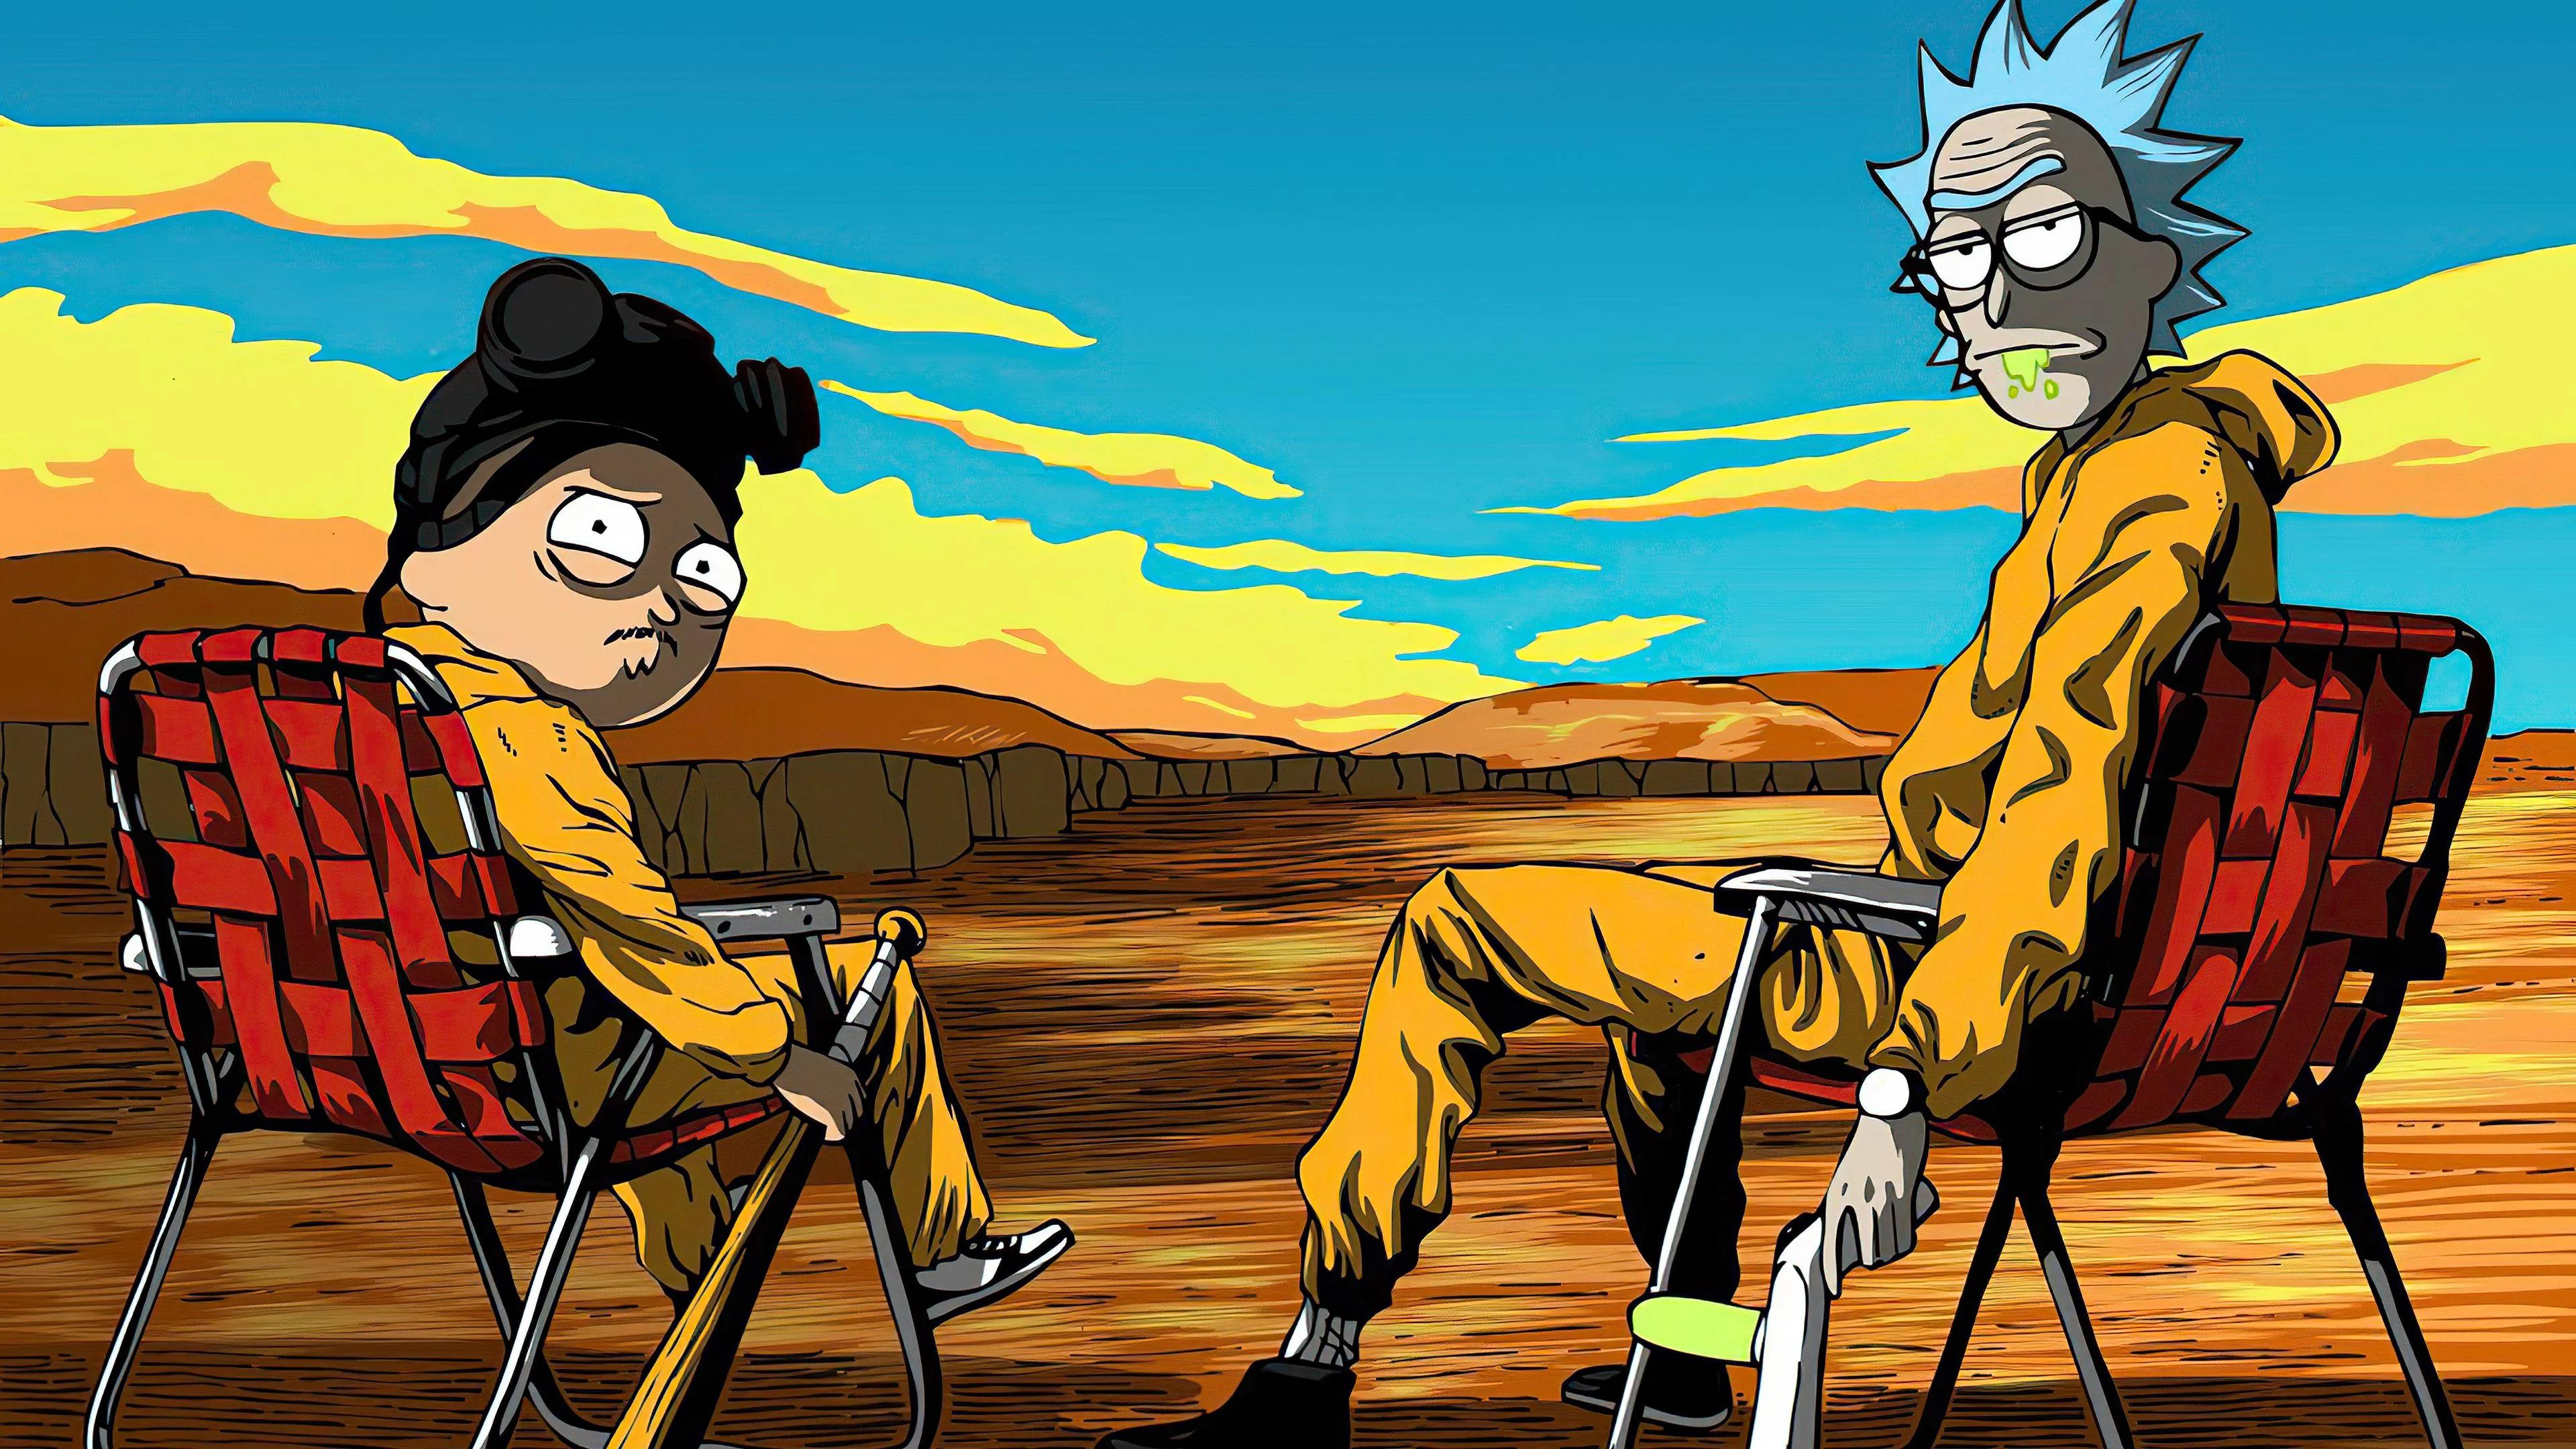 Rick and Morty with Breaking Bad's Walter White and Jesse Pinkman as the main characters - Rick and Morty